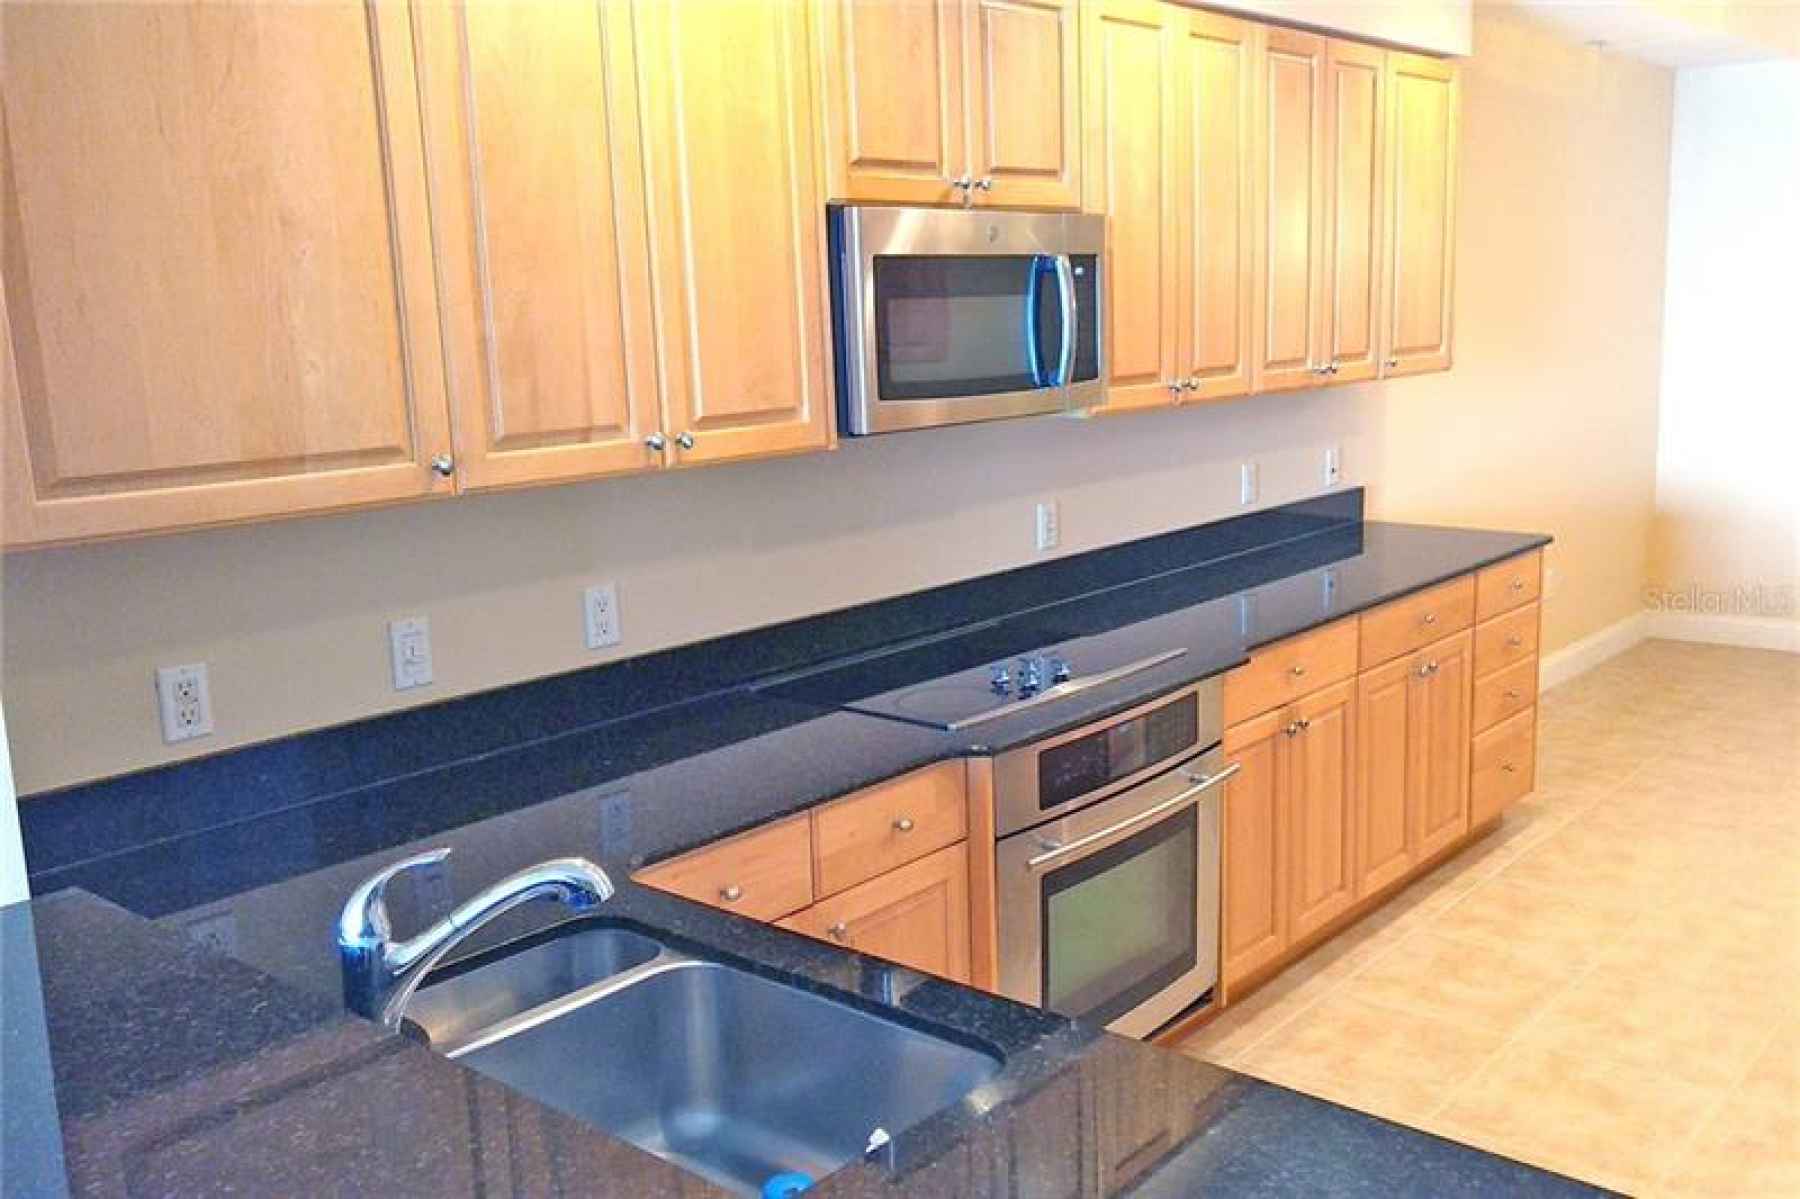 Kitchen with granite countertops, maple cabinetry, stainless undermount sink and stainless appliance